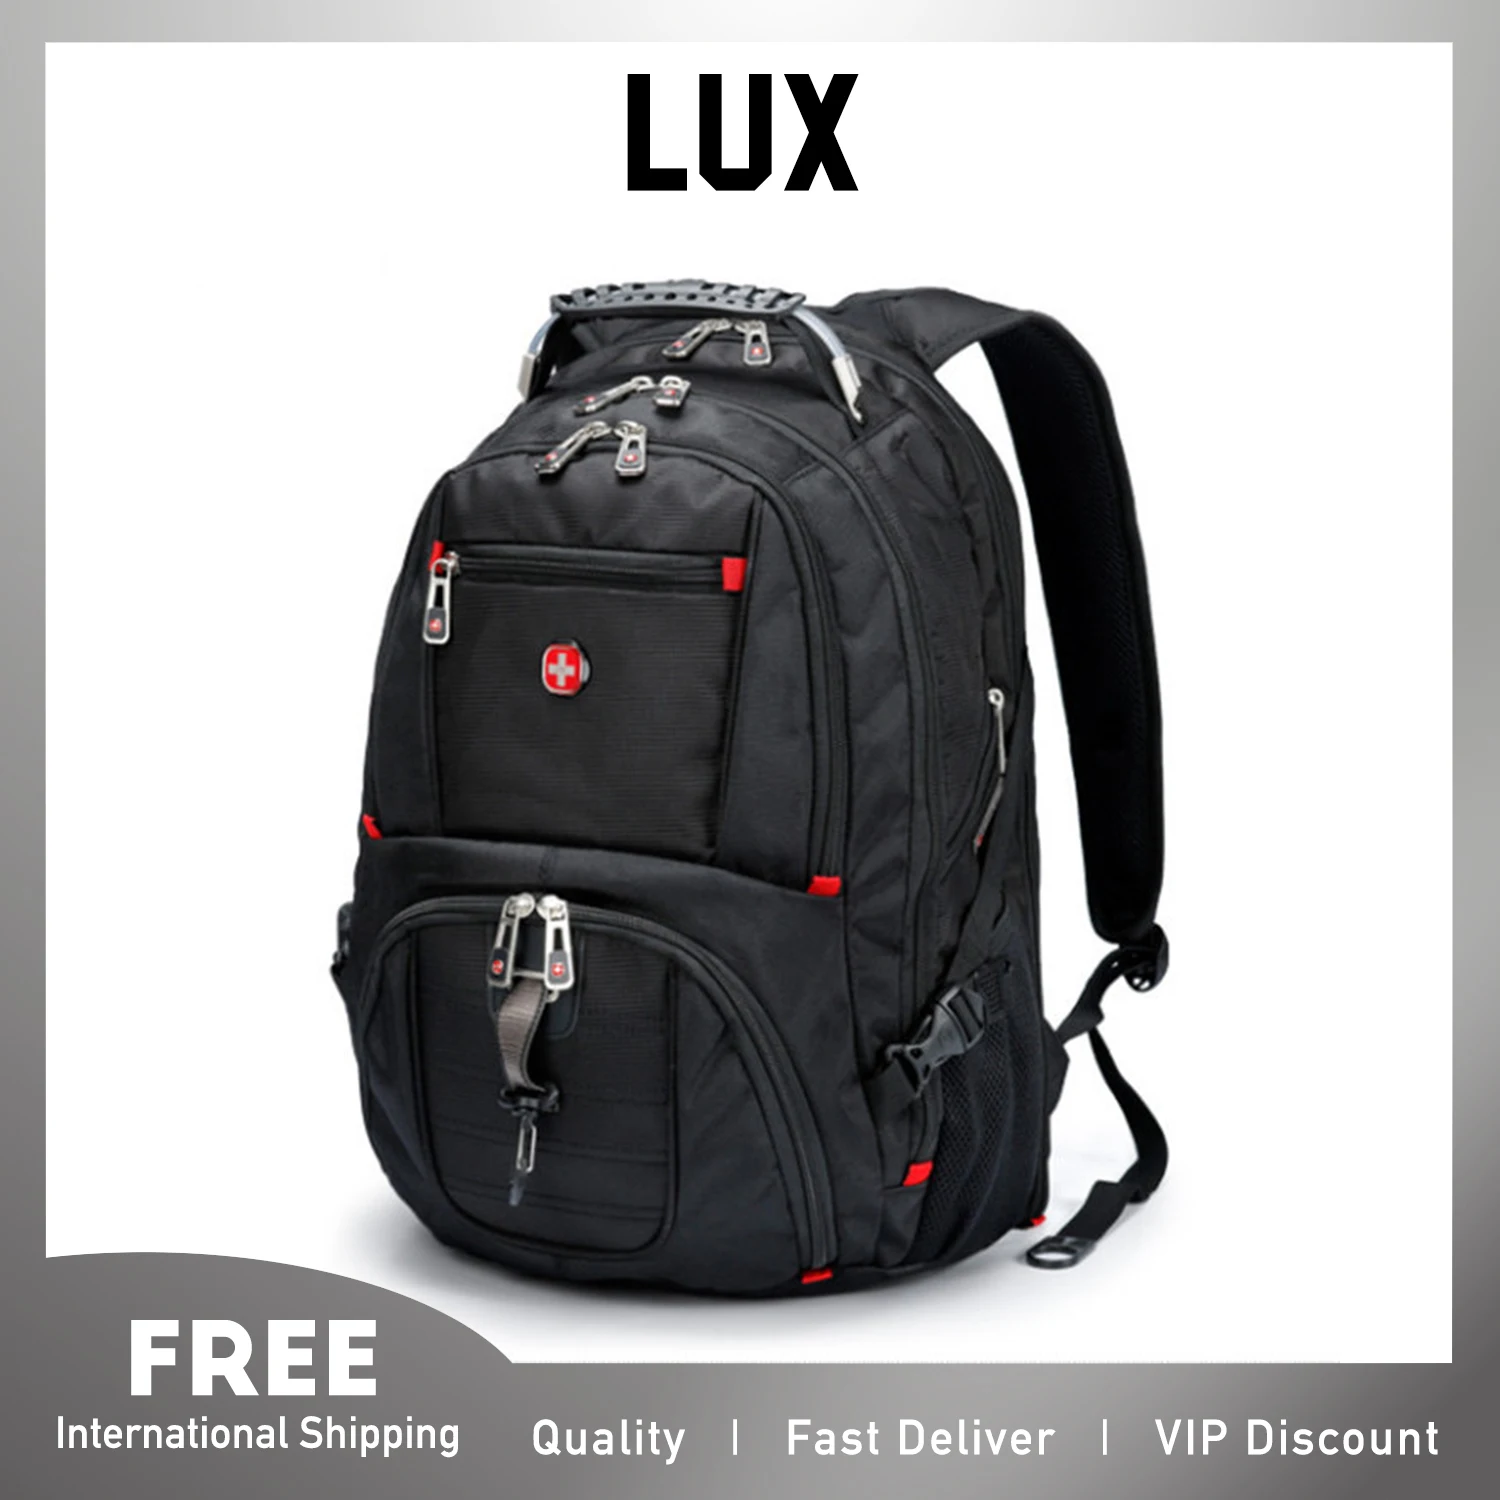 LUX New Swissgear Men's Tactical Large Backpack Waterproof Outdoor Sports Hiking Camping Backpack for Men Factory Sale